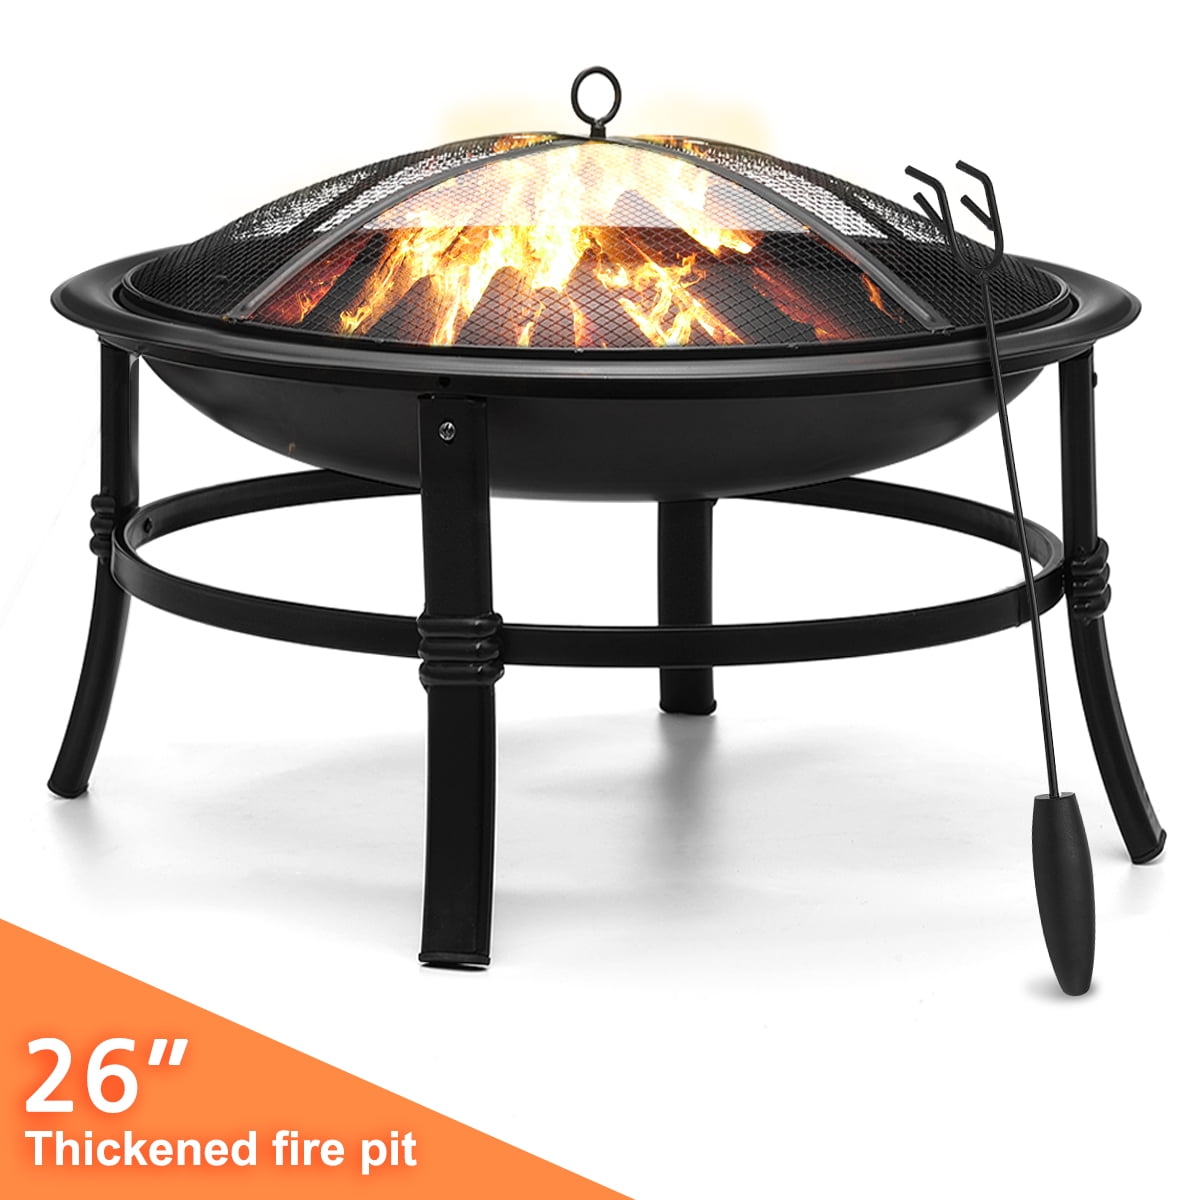 Kingso 26 Inch Fire Pit For Outdoor, Round Wood Burning Fire Pit